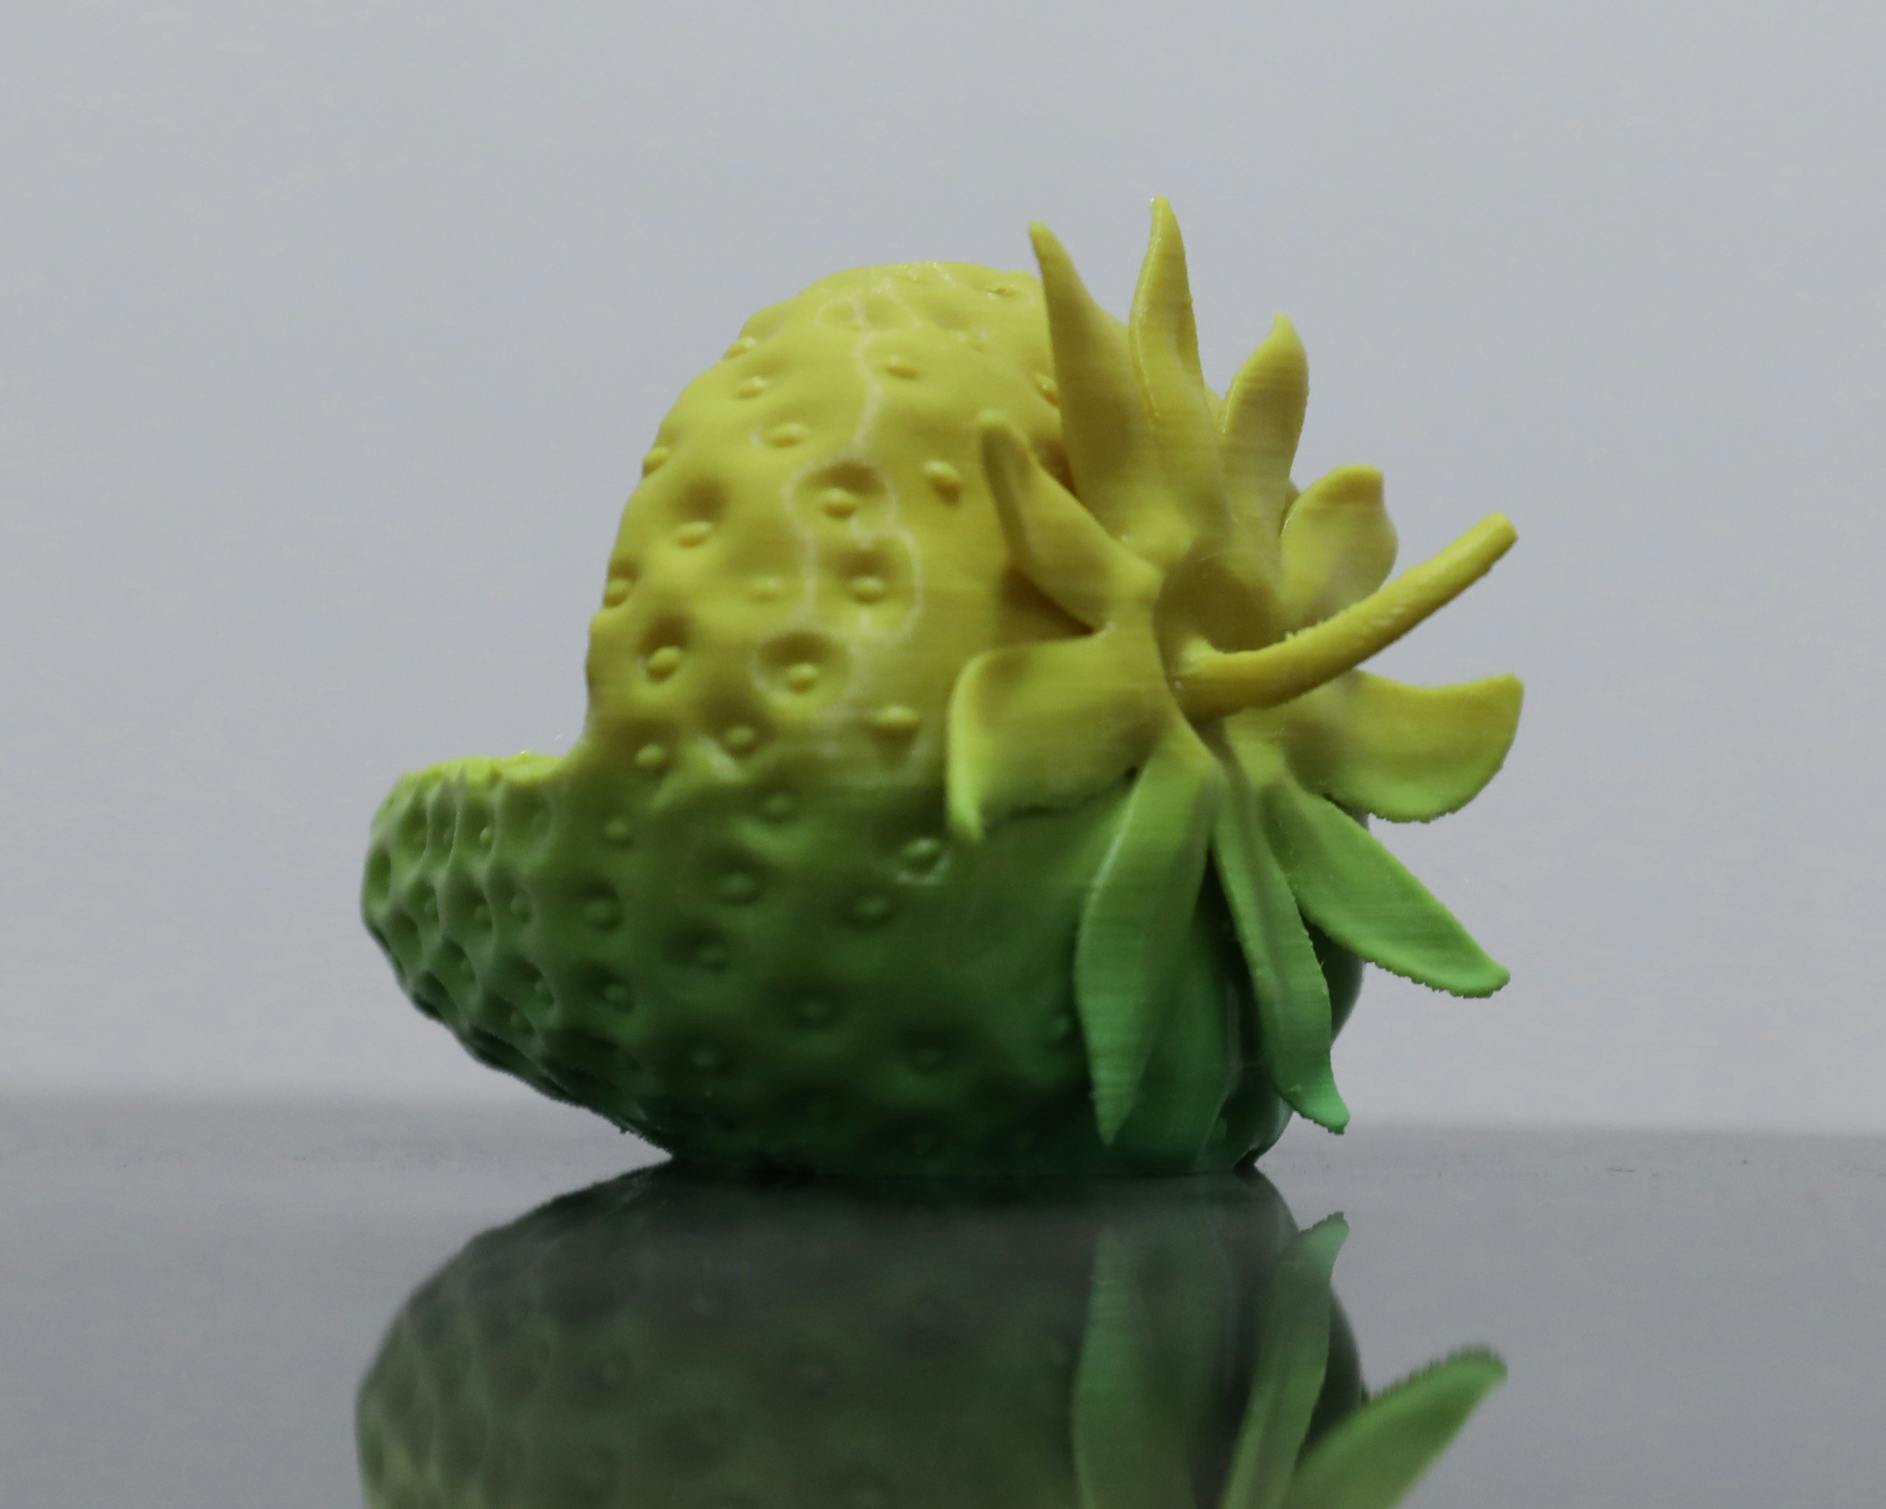 Trampled or in Your Hands, 2021 Polylactic acid 3D print.